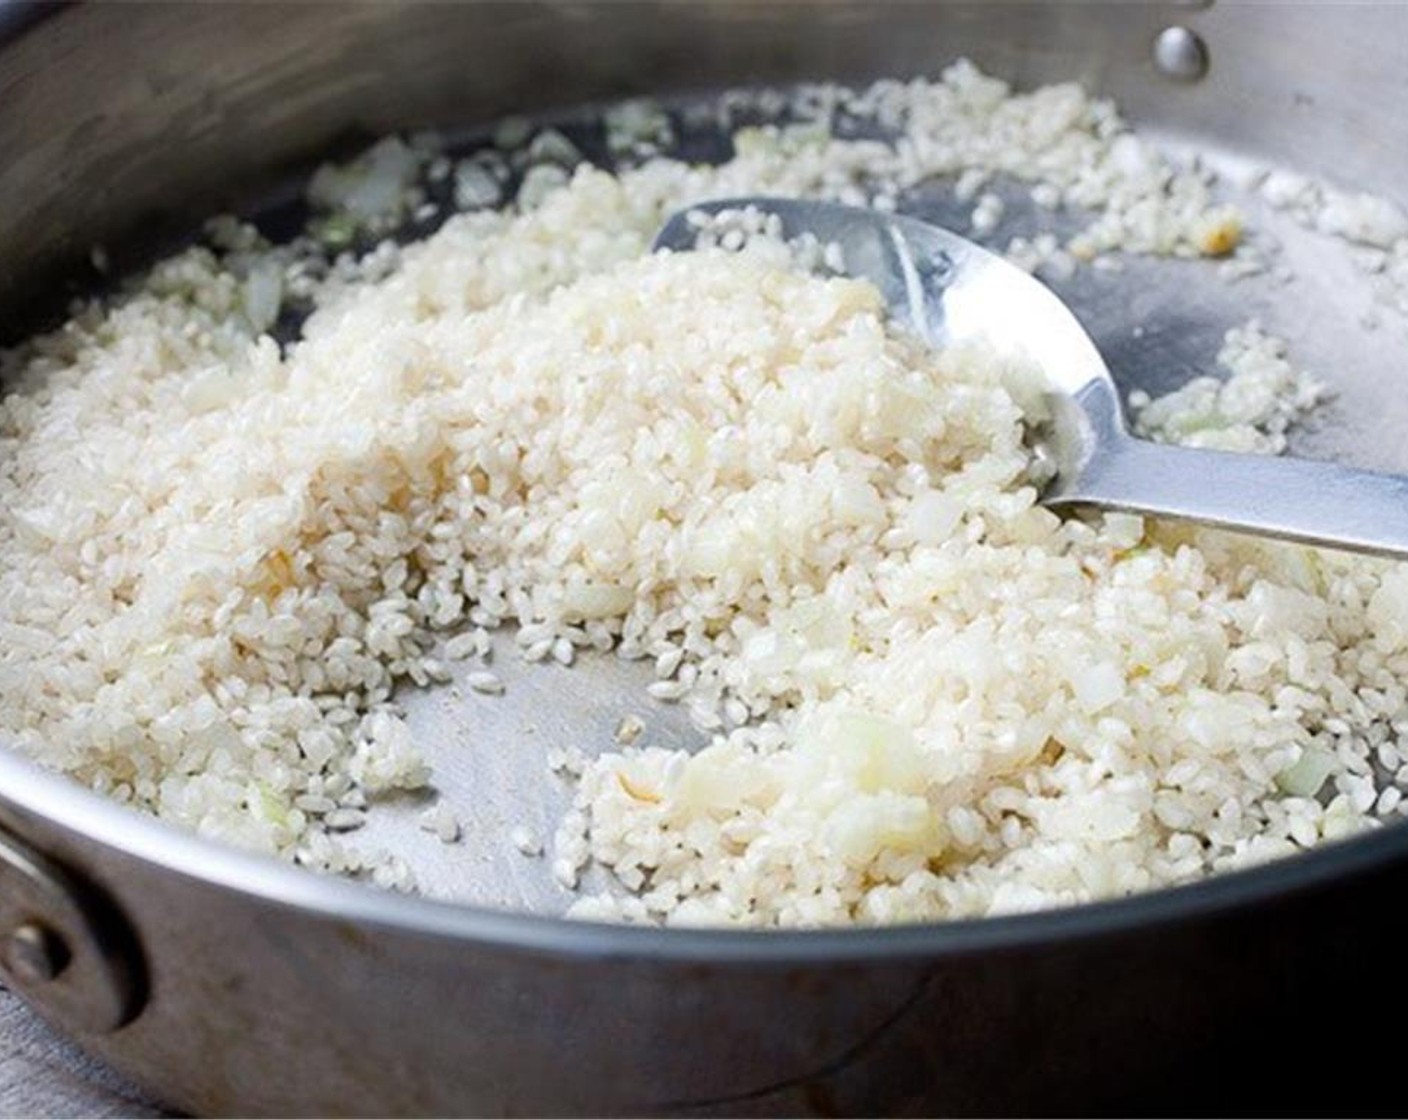 step 4 After the onions have softened, add the Arborio Rice (1 1/2 cups) and let it cook over medium heat for about 90 seconds. After the rice is dry cooked, add the Dry White Wine (1/2 cup) to the skillet and use the liquid to scrape up any bits. It’ll cook off quickly.